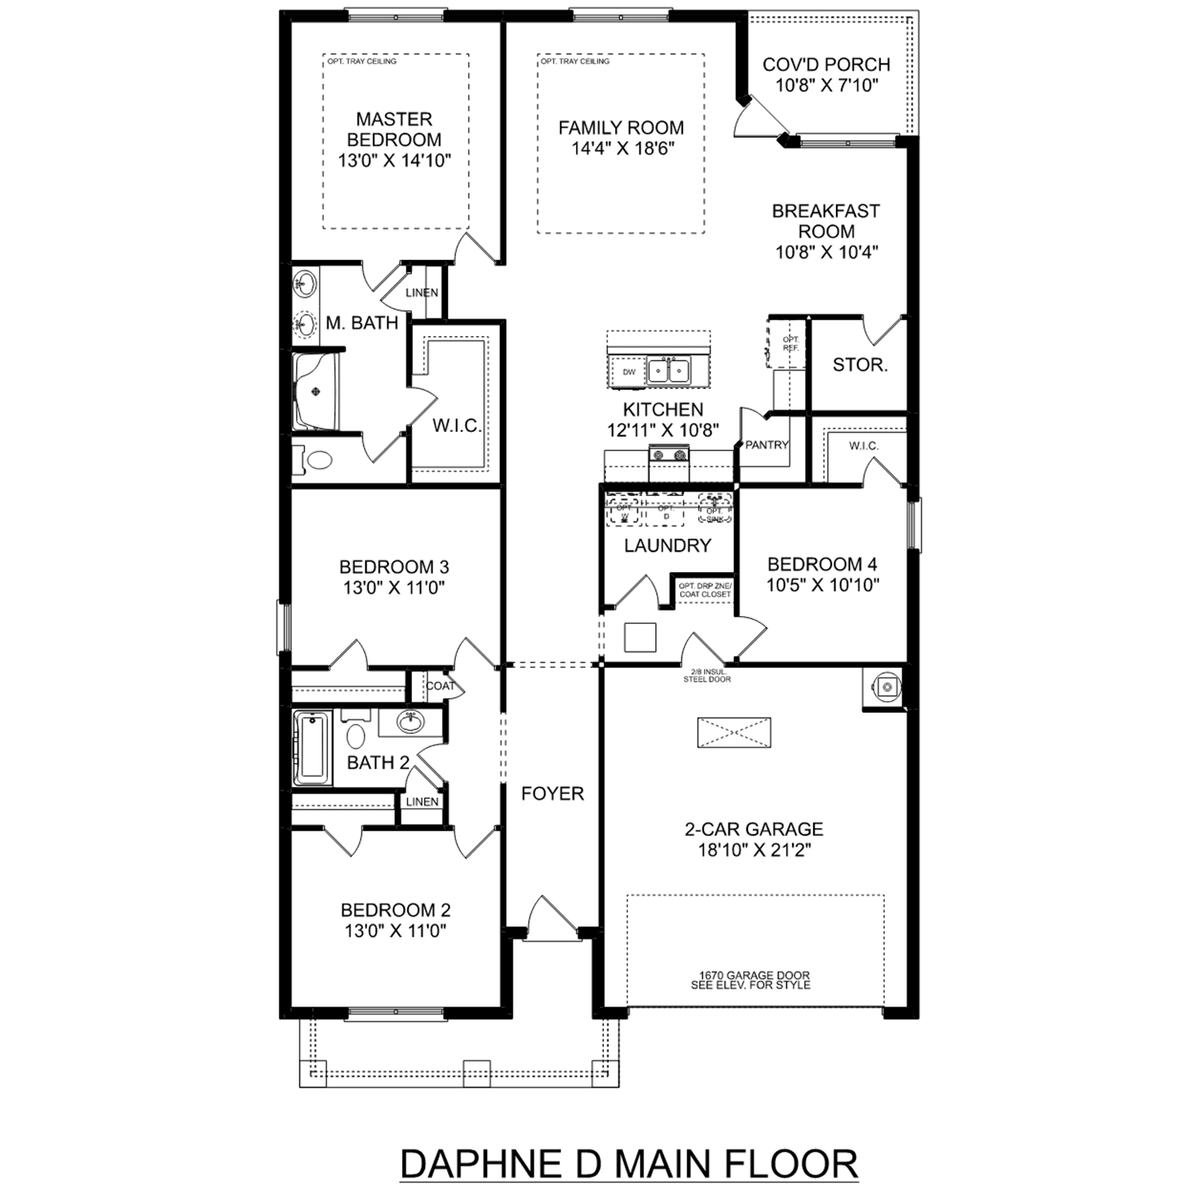 1 - The Daphne D floor plan layout for 9212 Current Way SE in Davidson Homes' Watts Glen community.